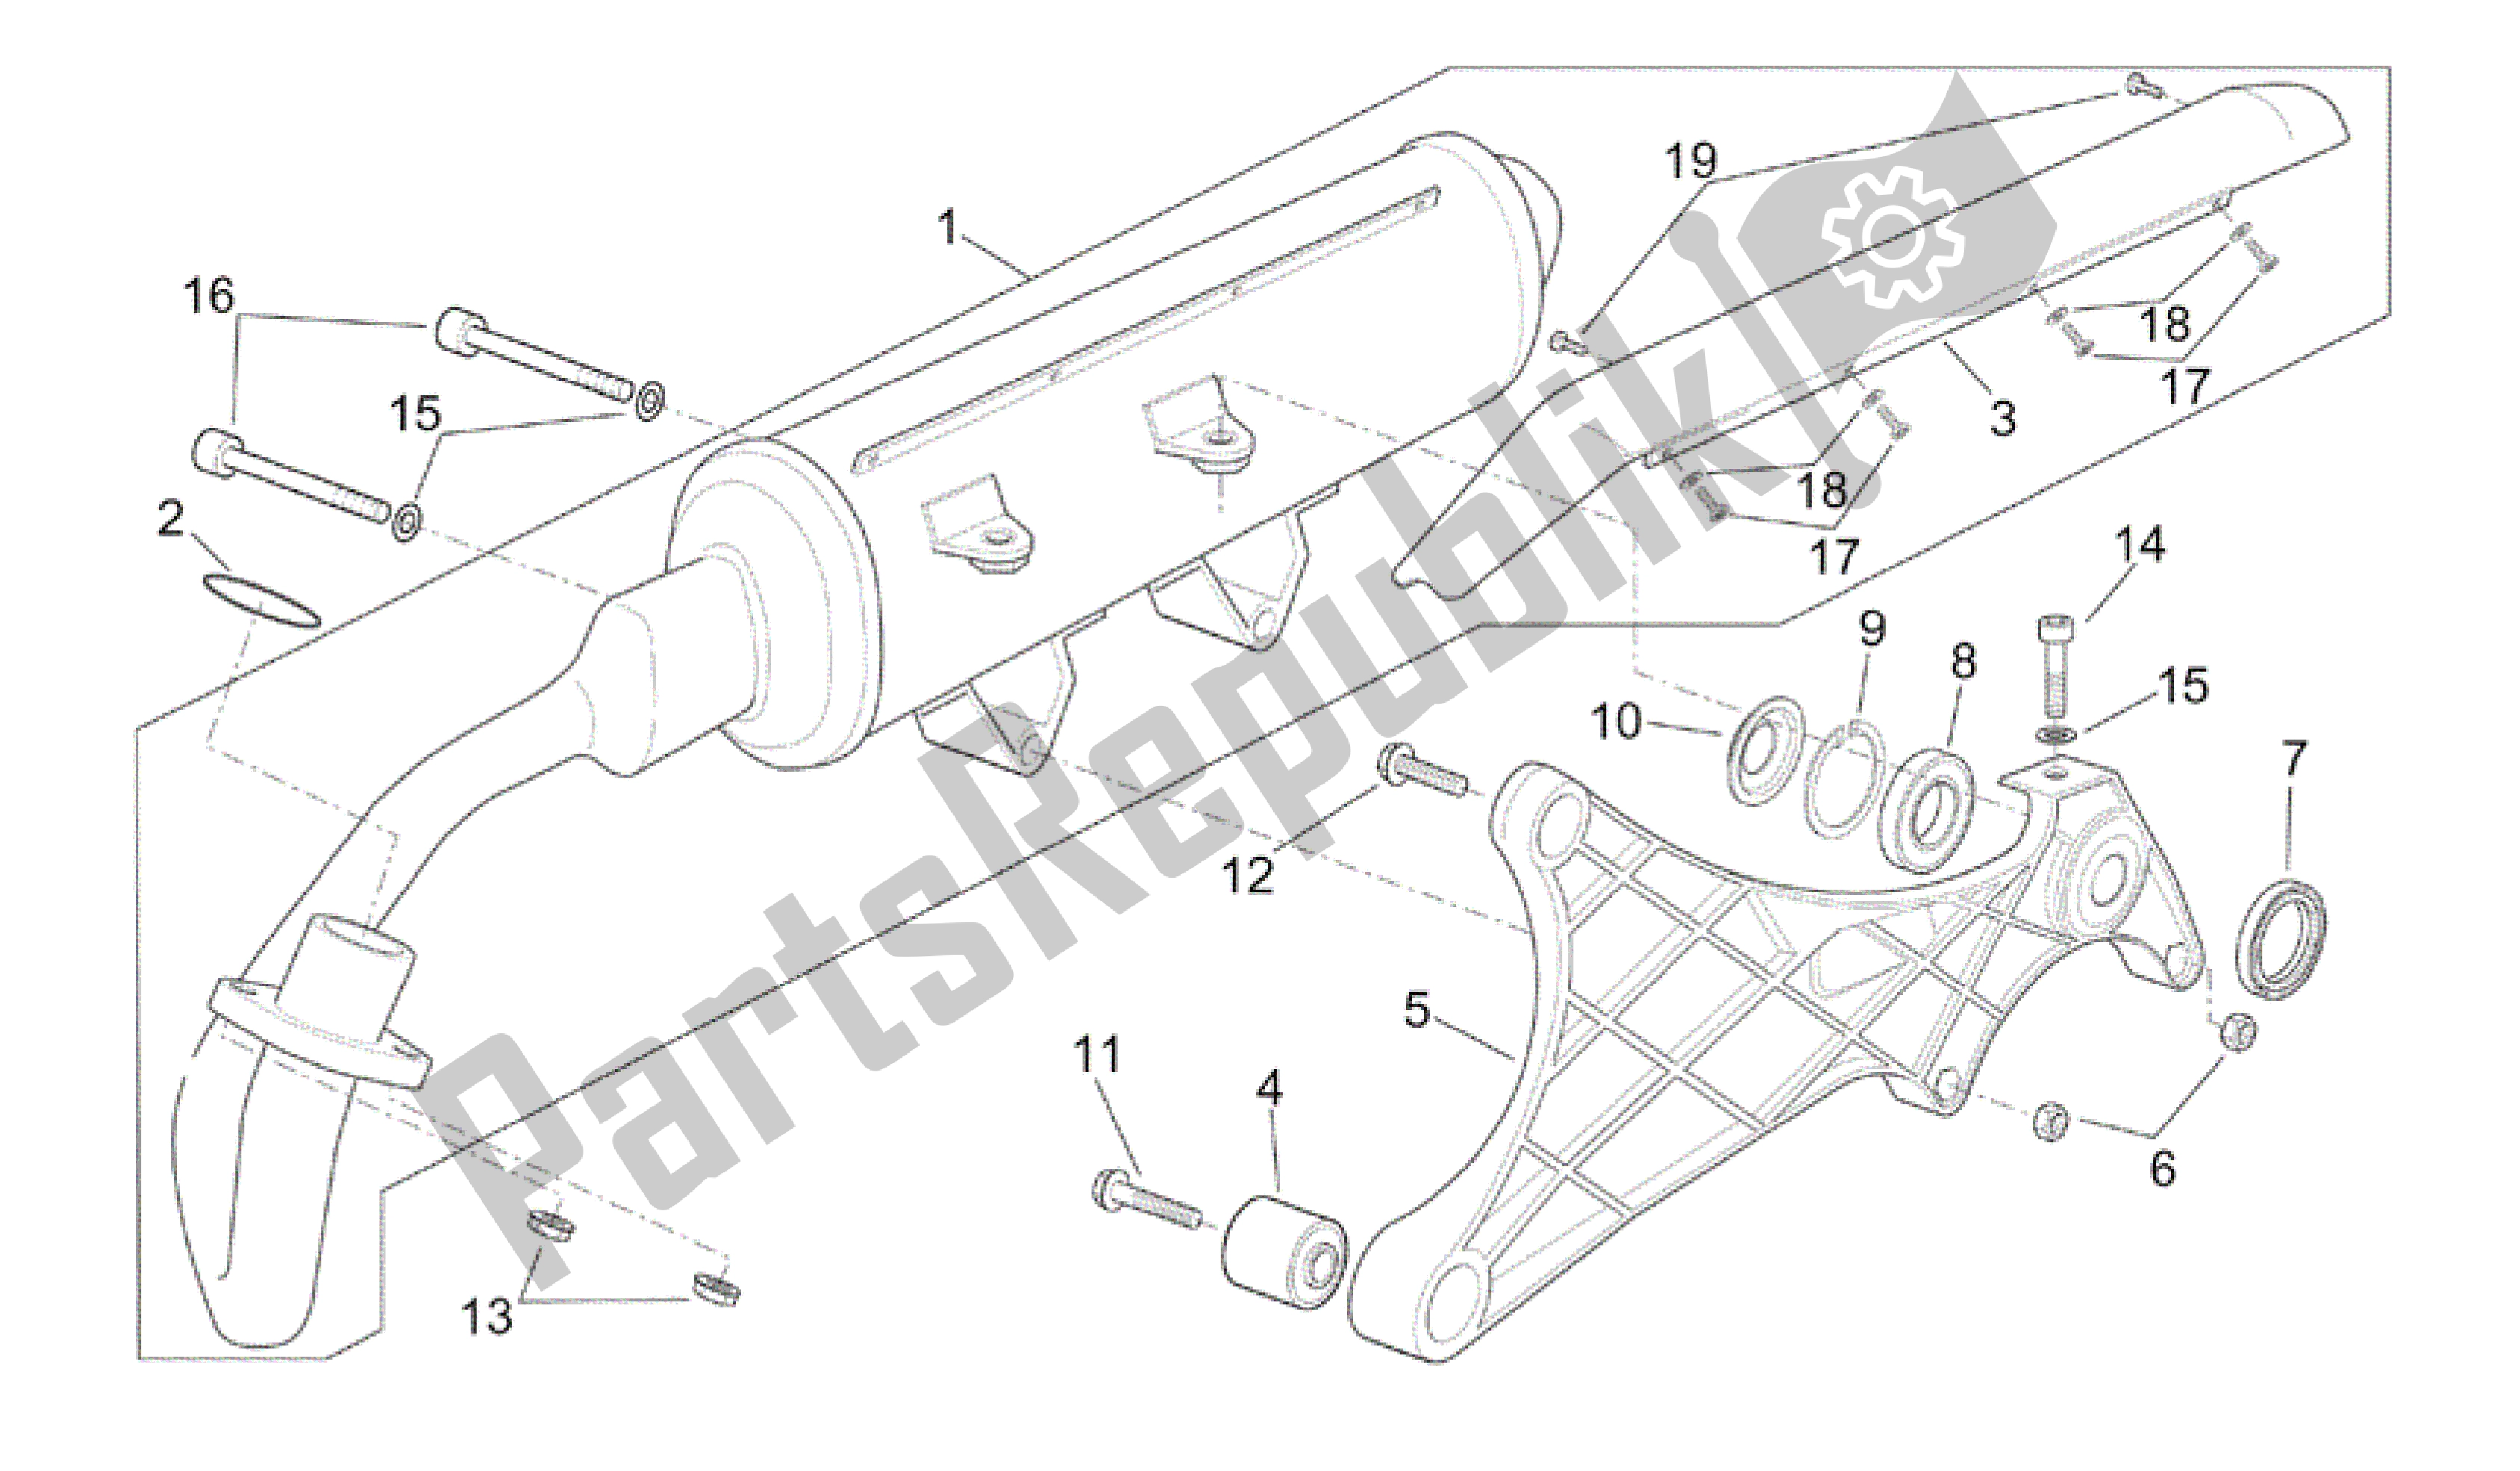 All parts for the Exhaust Unit of the Aprilia Scarabeo 125 1999 - 2004